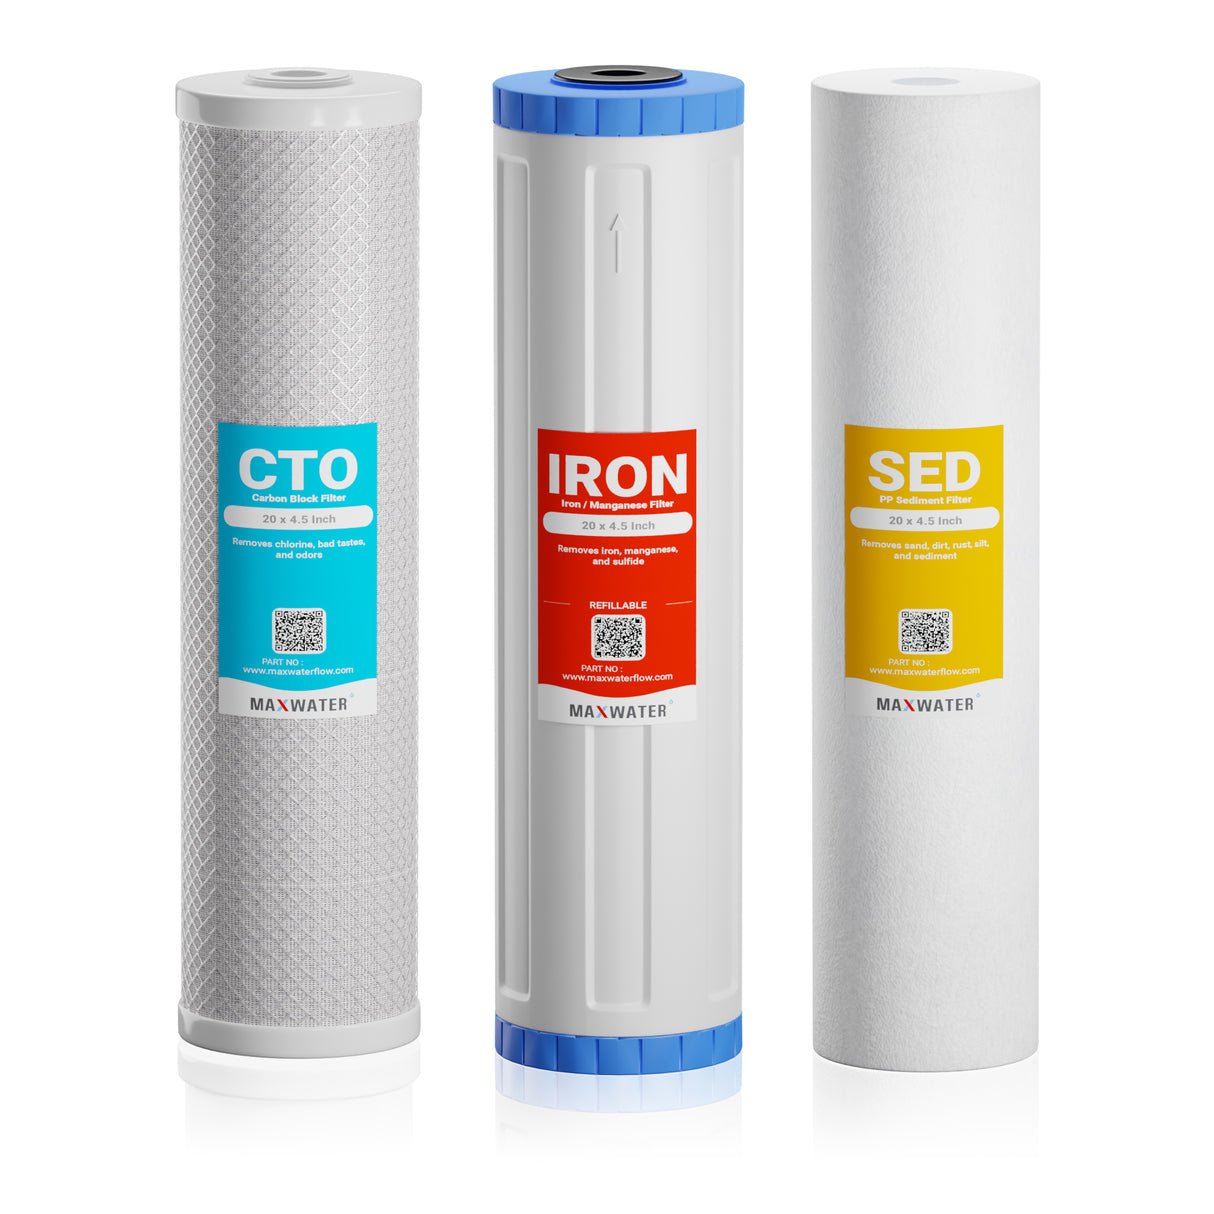 iron removal filter, complete Your Whole House Filtration with Water Filter Cartridges